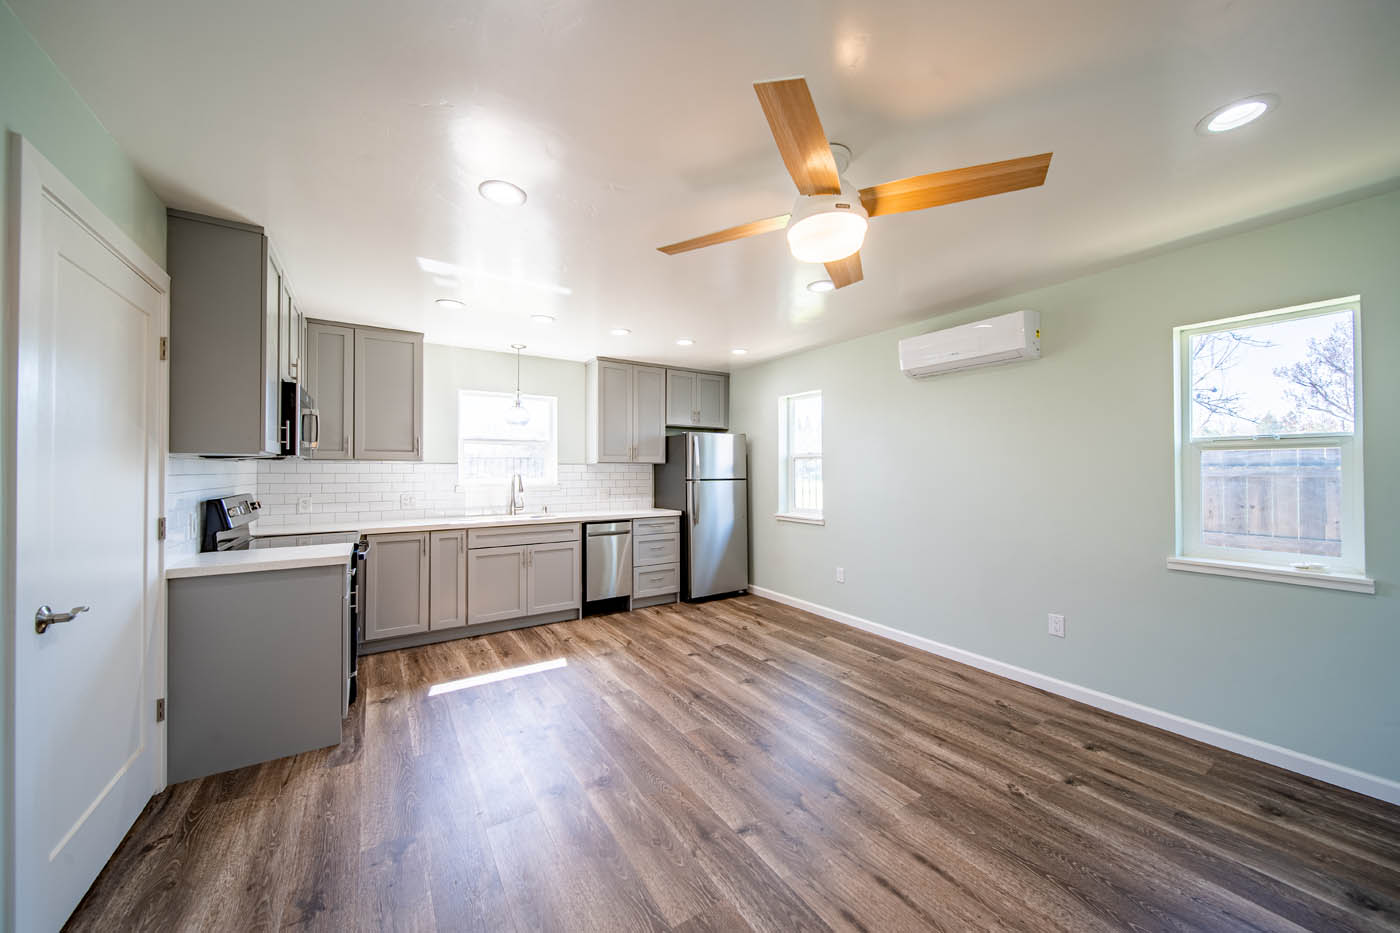 Anchored Tiny Homes East Bay ADU Gallery: 2-Bedroom ADUs. - 4